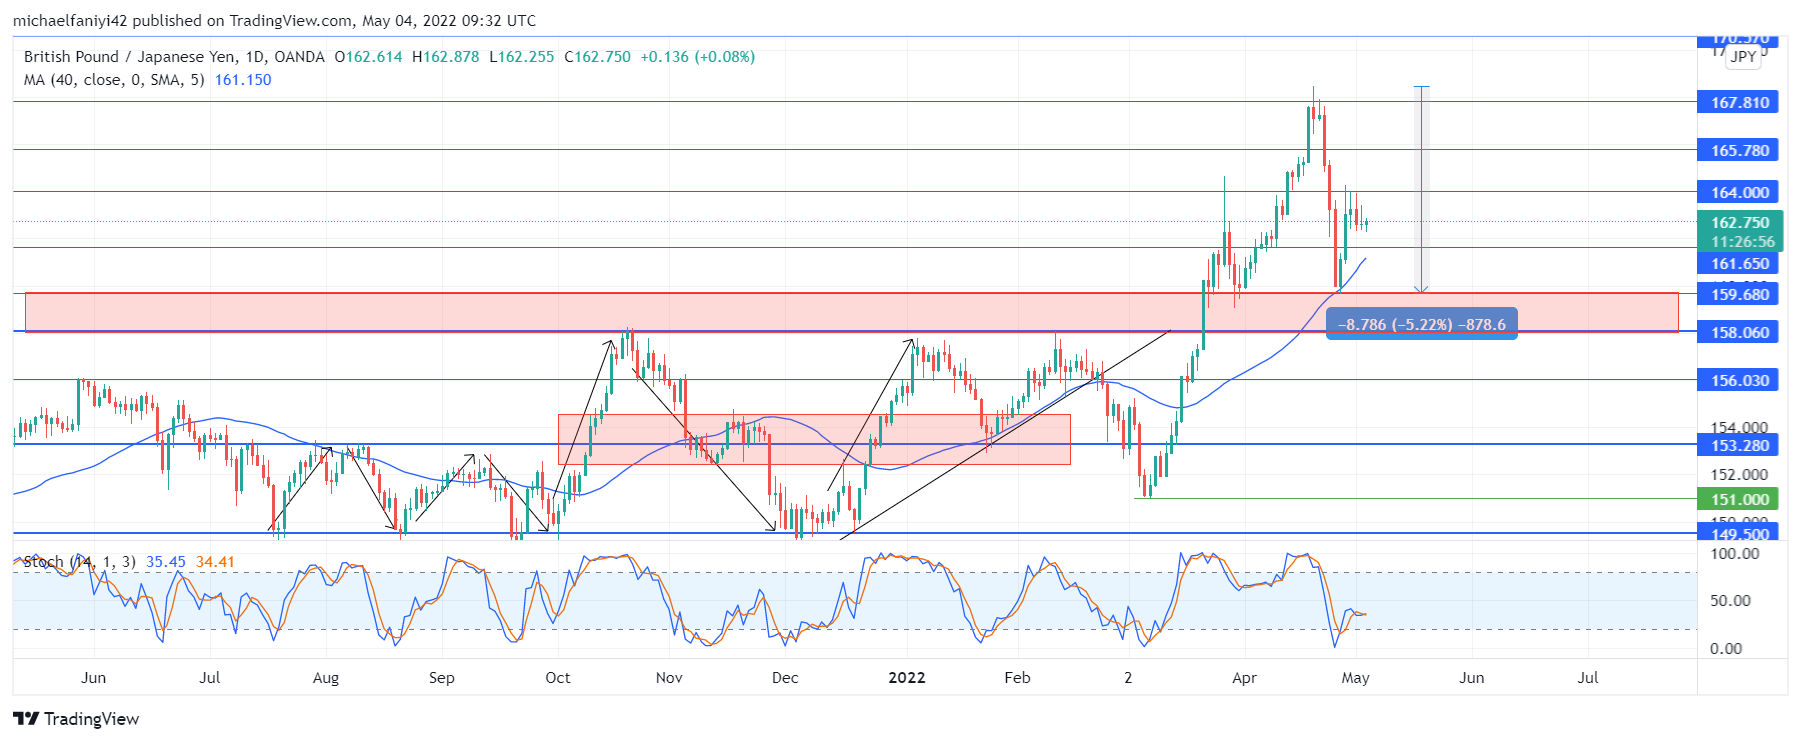 GBPJPY Revives Bullishness From the 159.680 Support Level